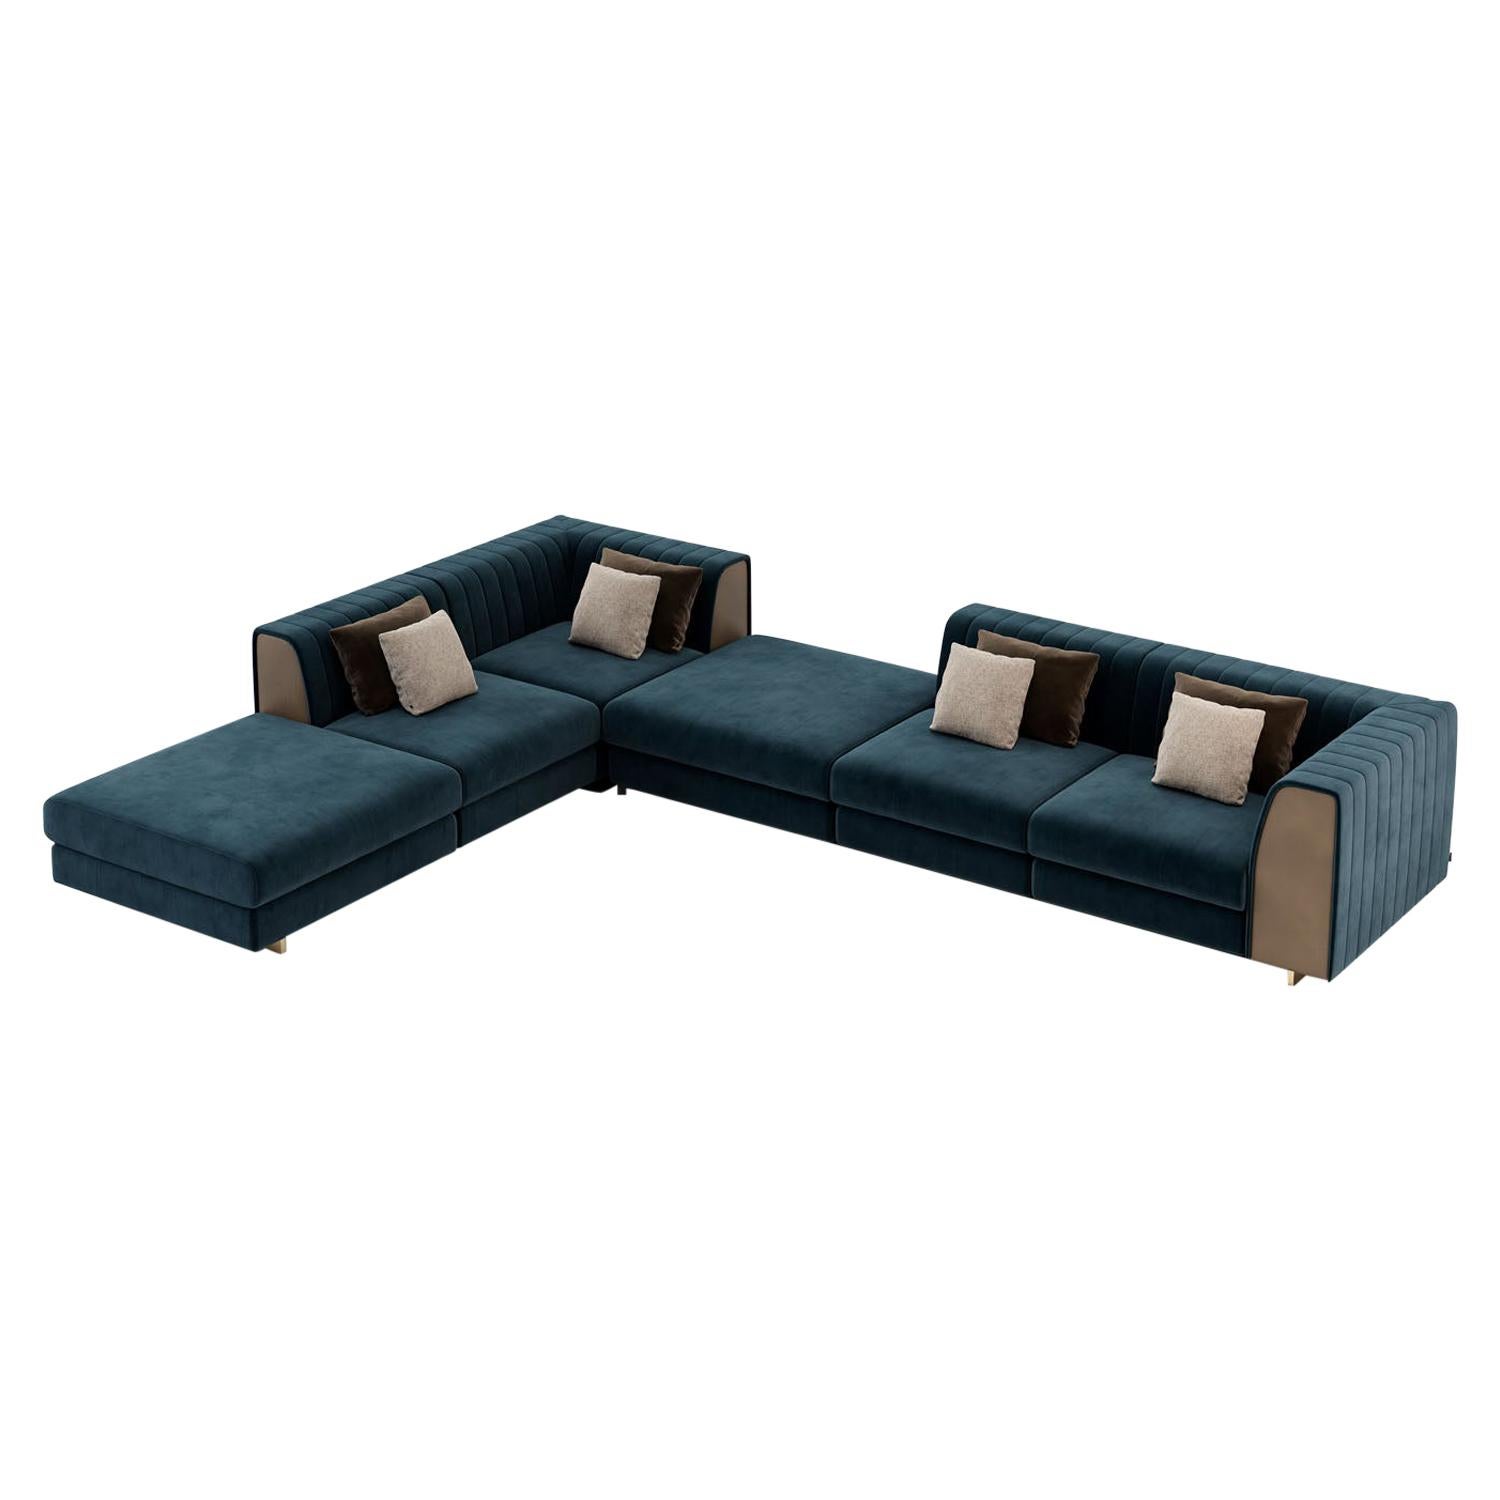 Modular sectional sofa with customisable fabric by Laskasas For Sale